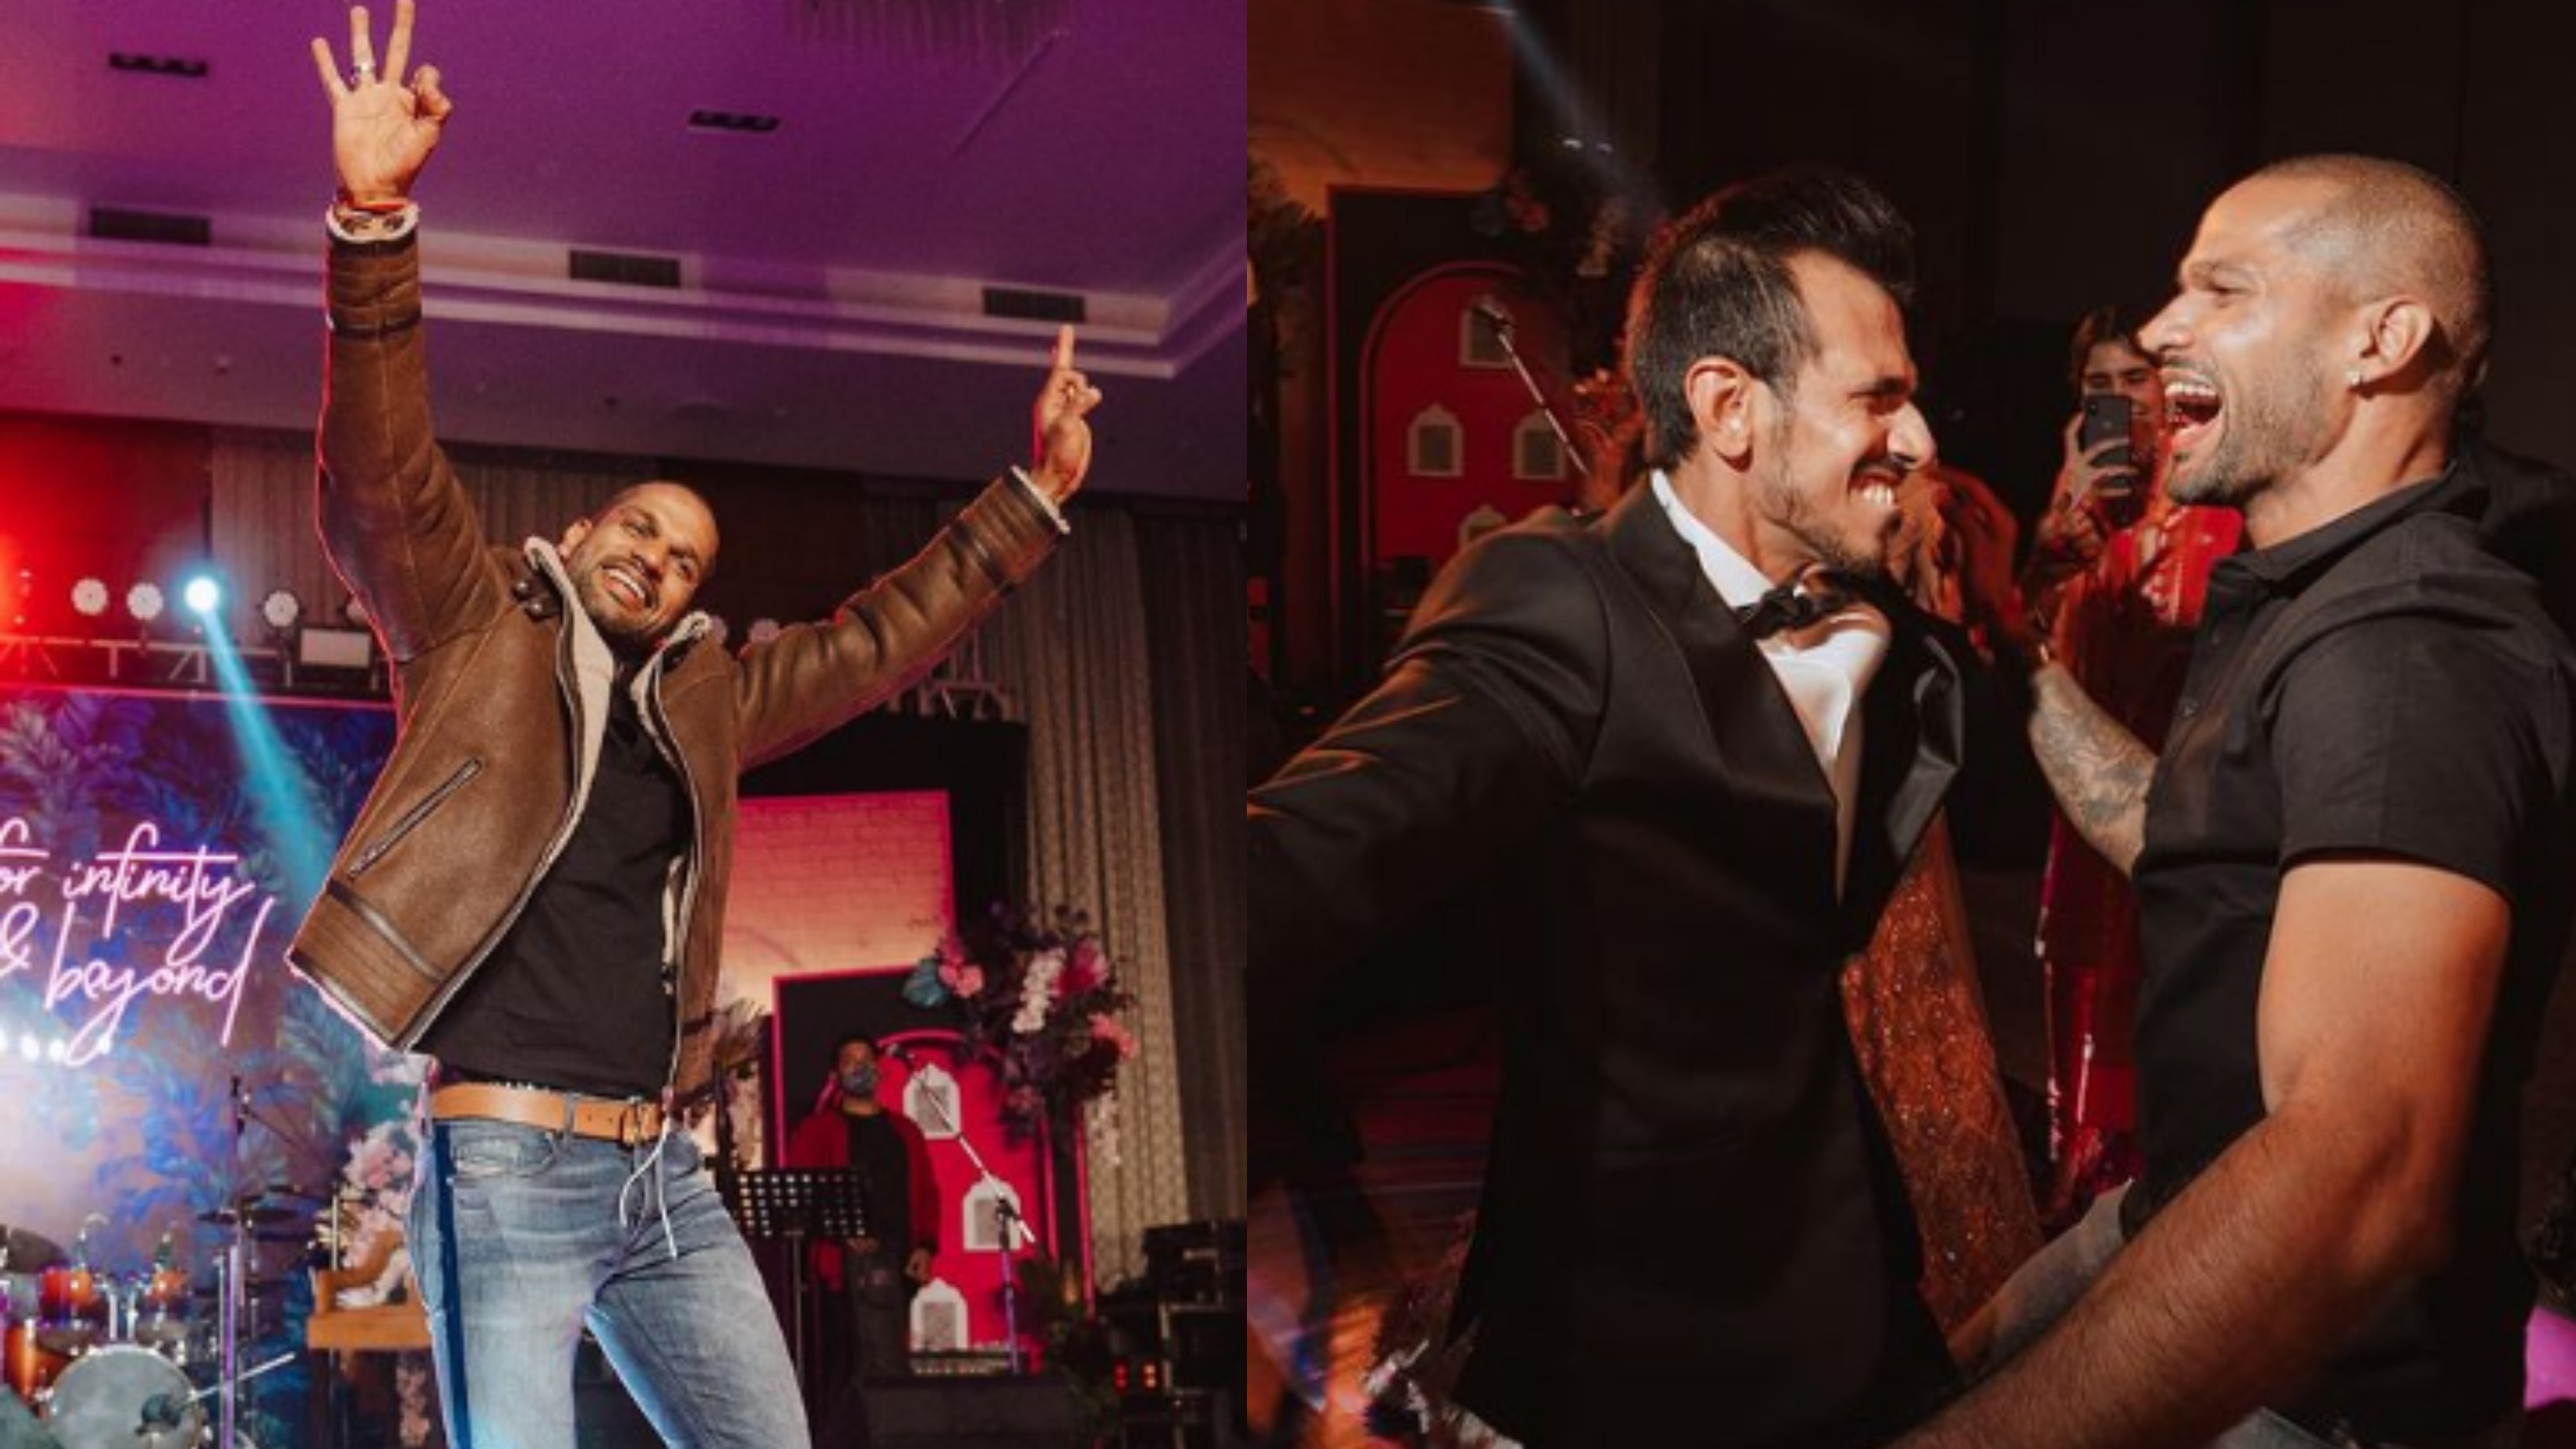 Yuzvendra Chahal shares photos from his sangeet ceremony; seen grooving with Shikhar Dhawan